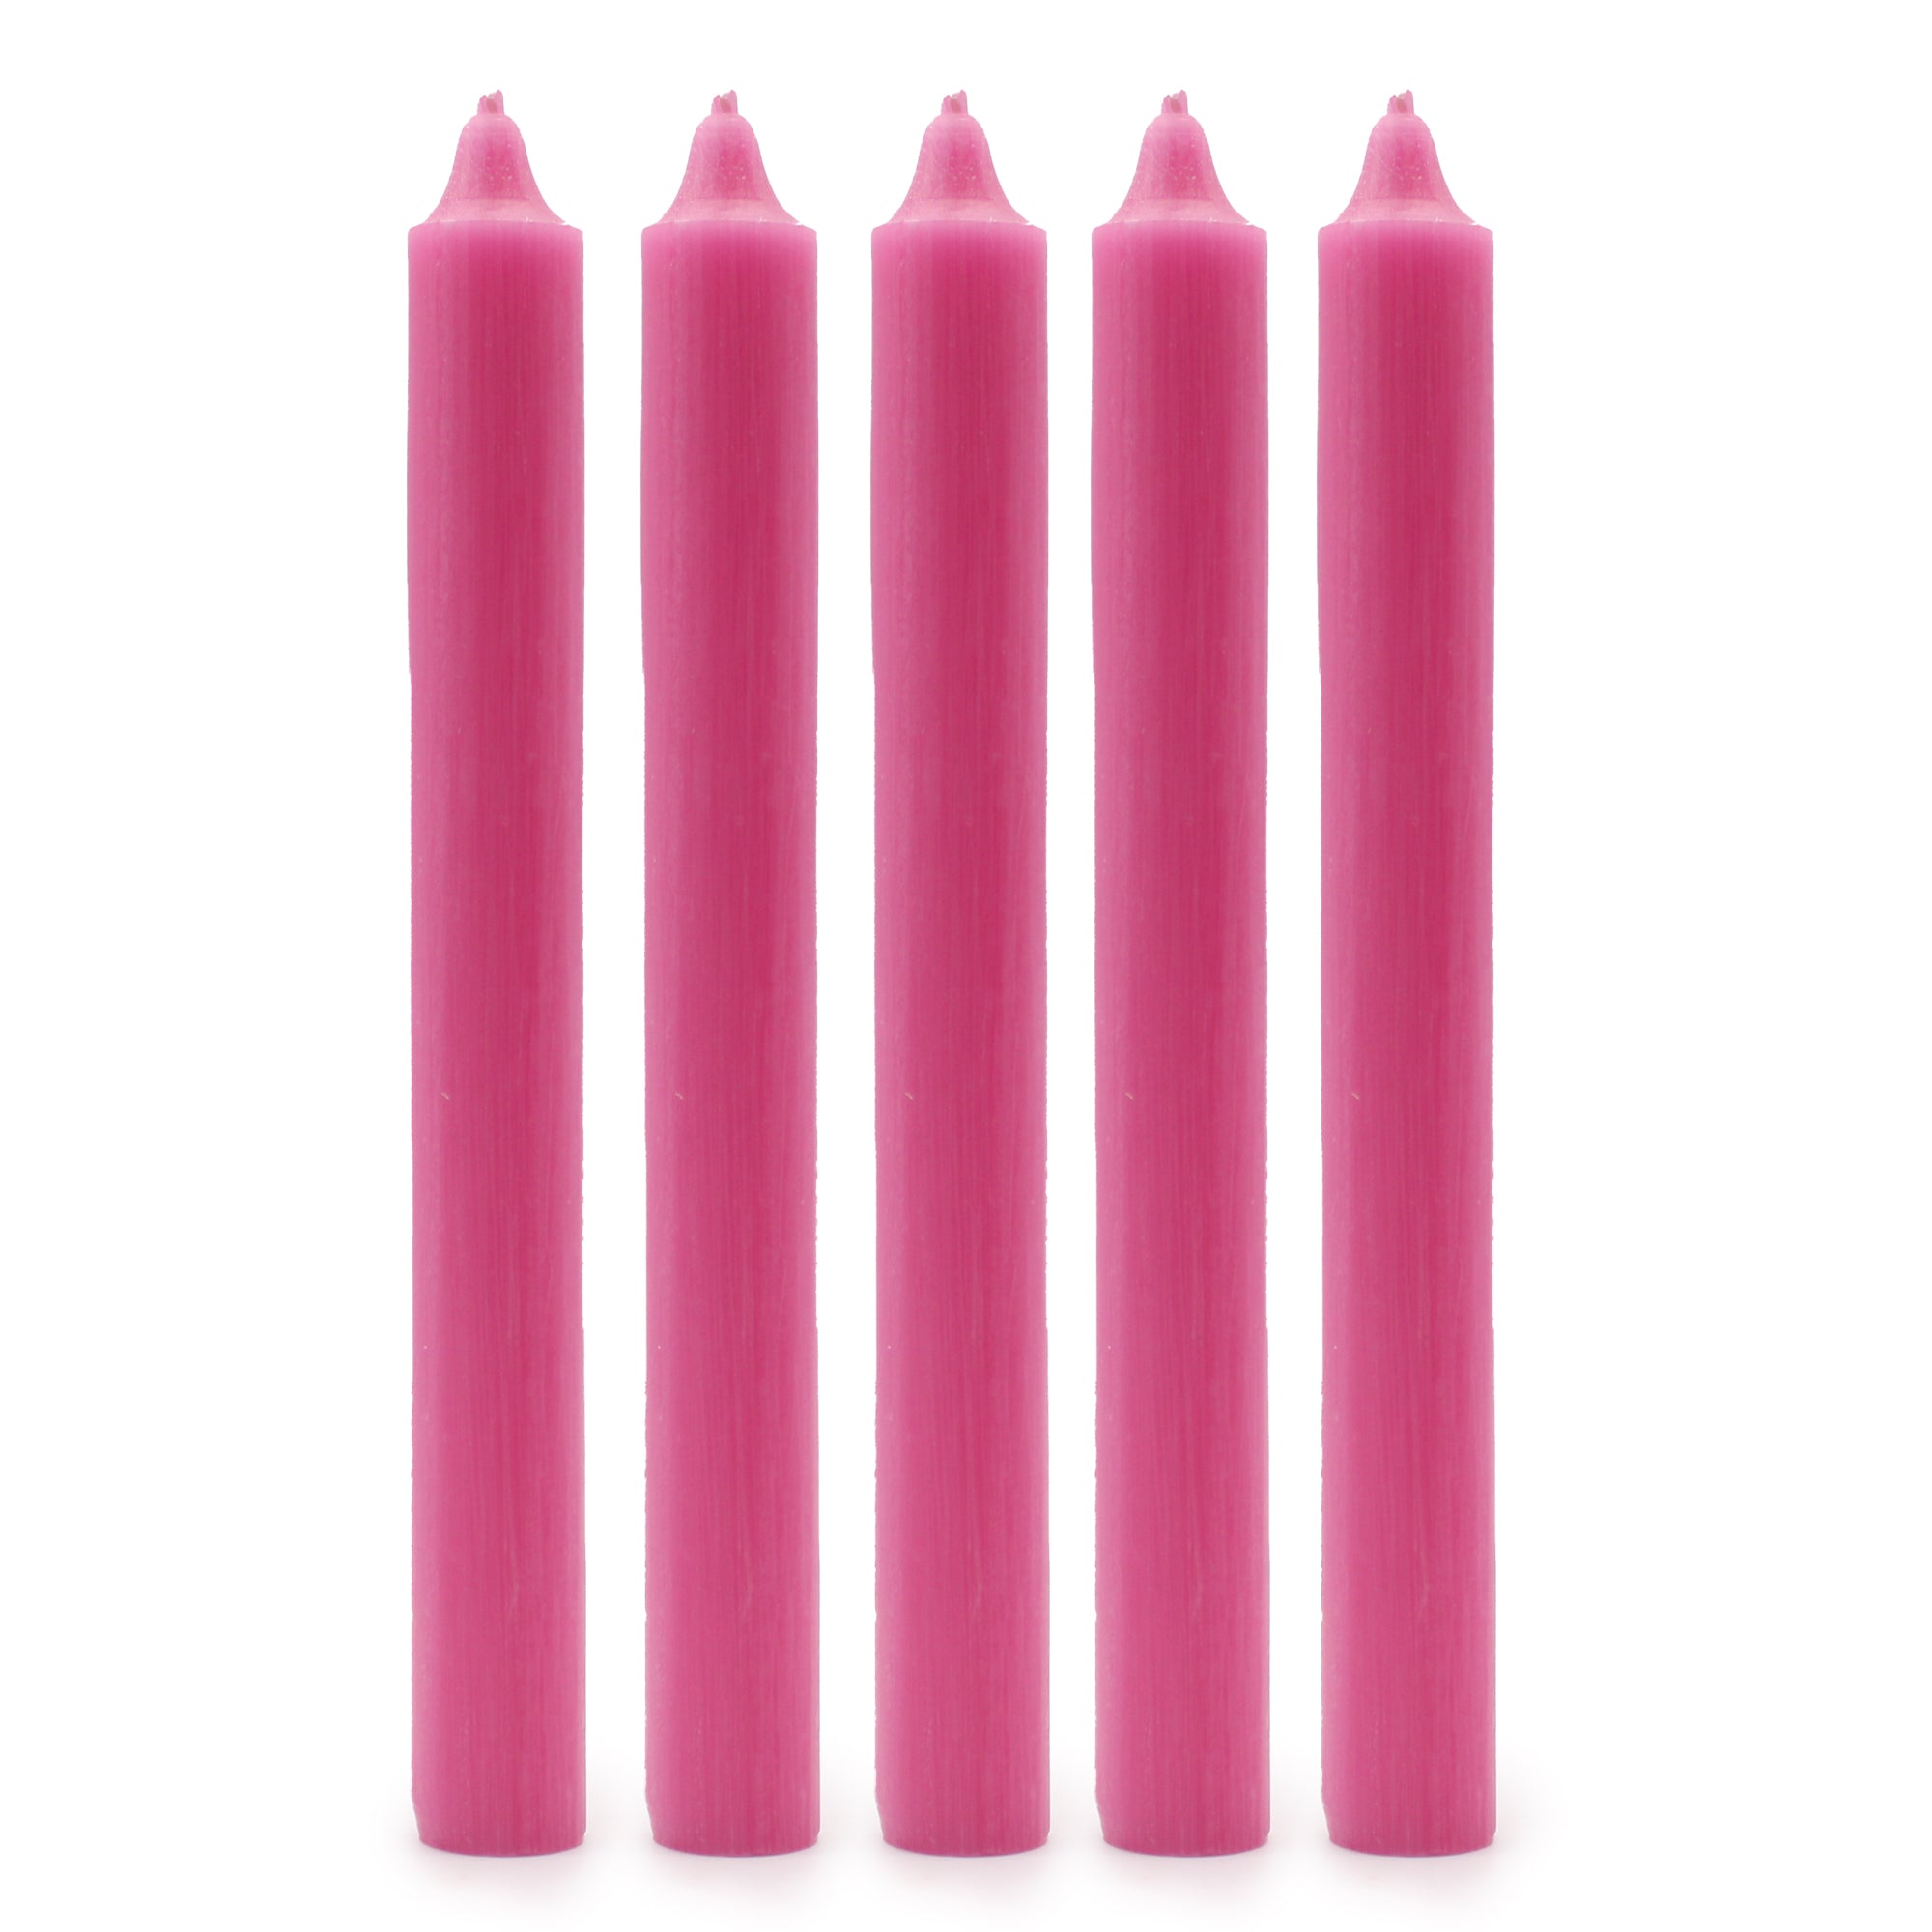 View Solid Colour Dinner Candles Rustic Deep Pink Pack of 5 information